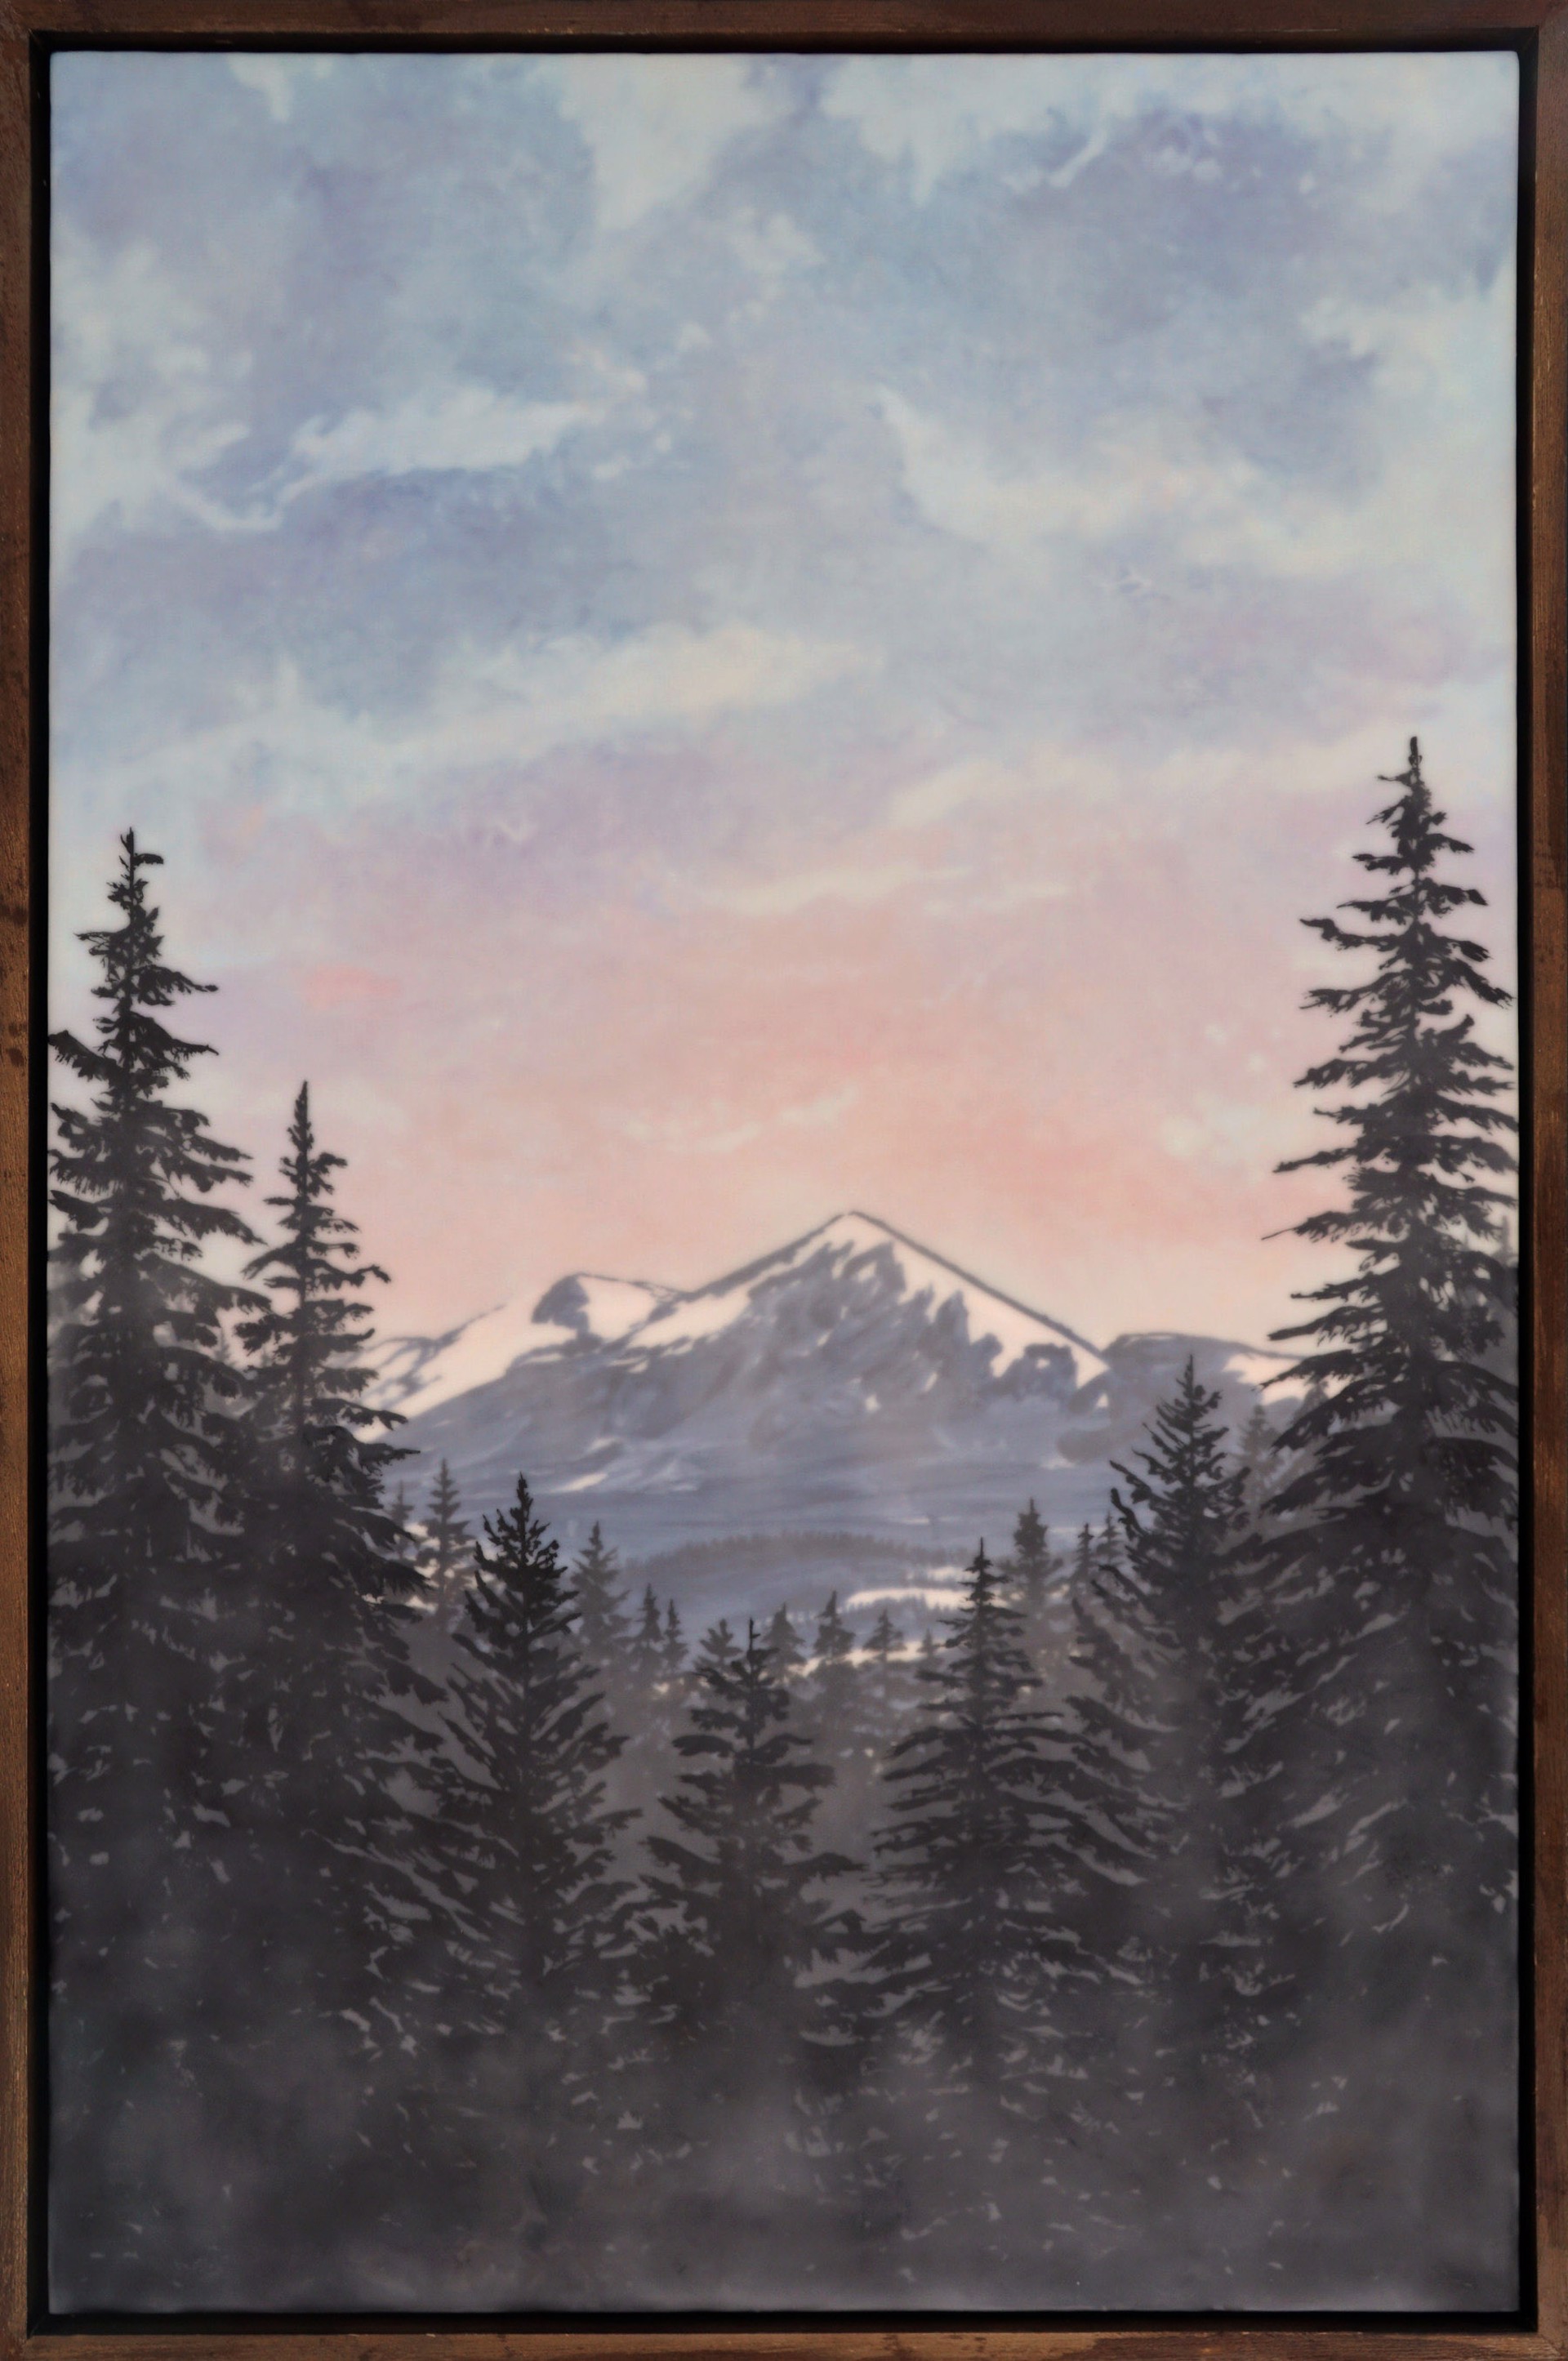 Early Morning Light Rising Behind Snow Capped Mountains Lighting Up The Clouds And Sky, Framed By Slender Silhouettes Of Evergreens.